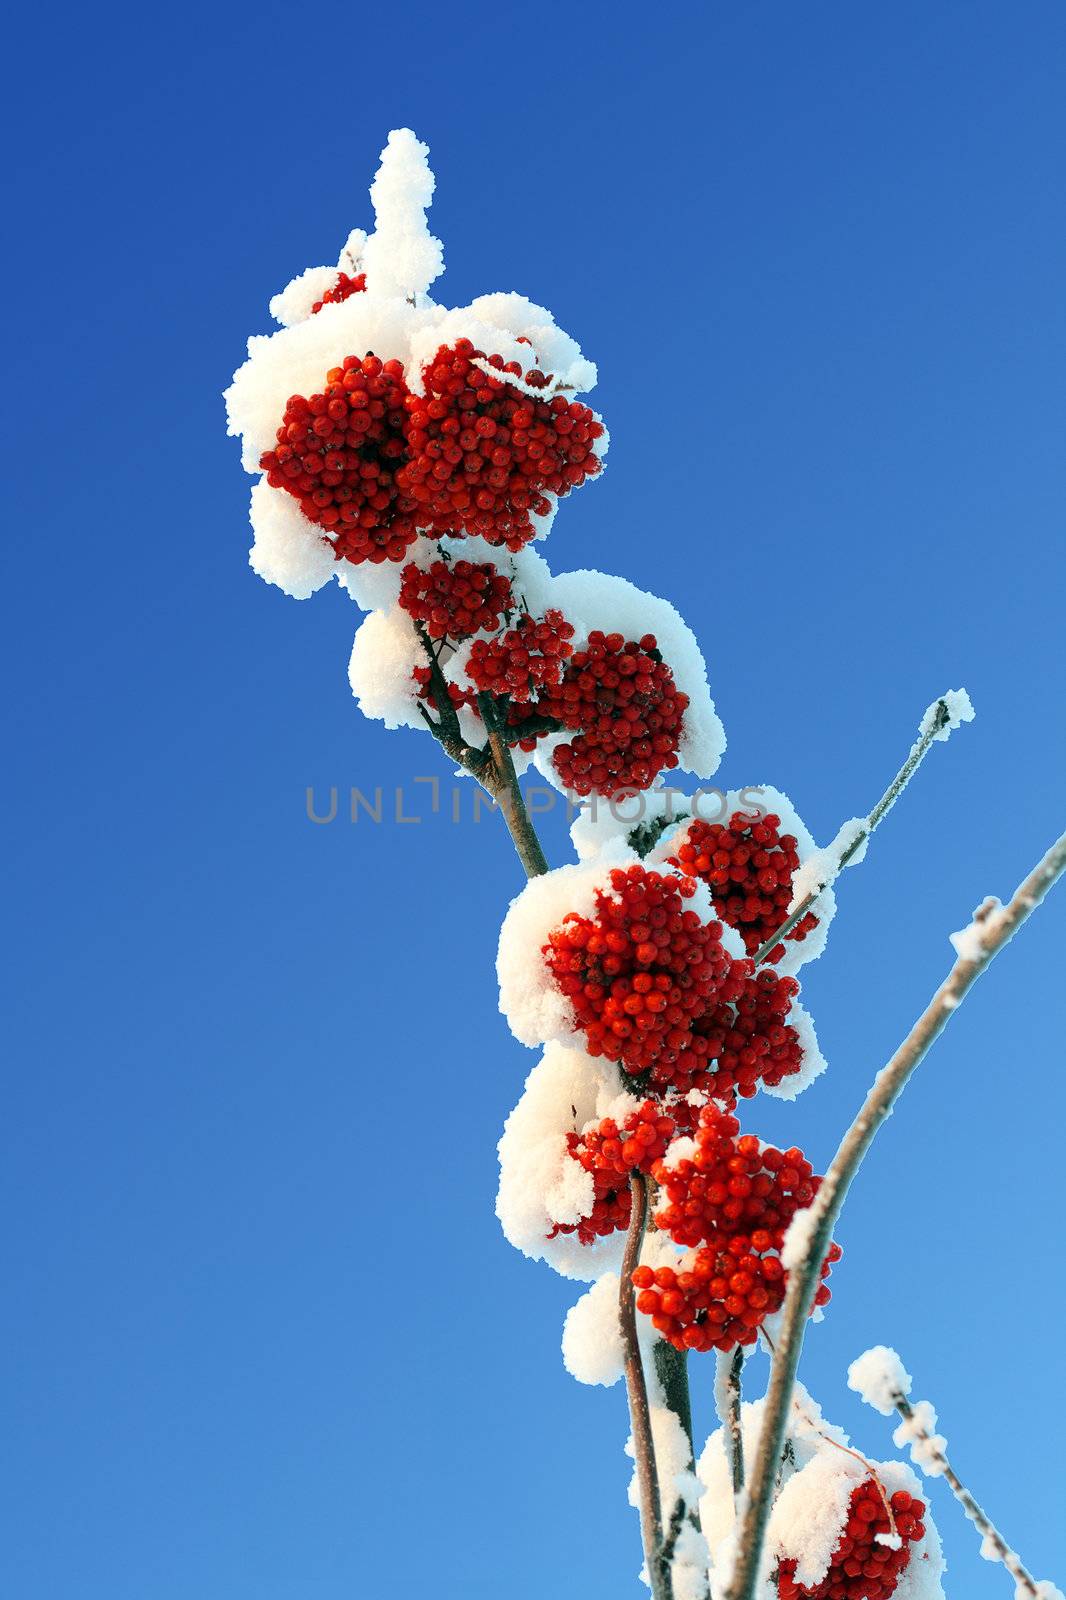 ash-berry red branches under snow and blue sky